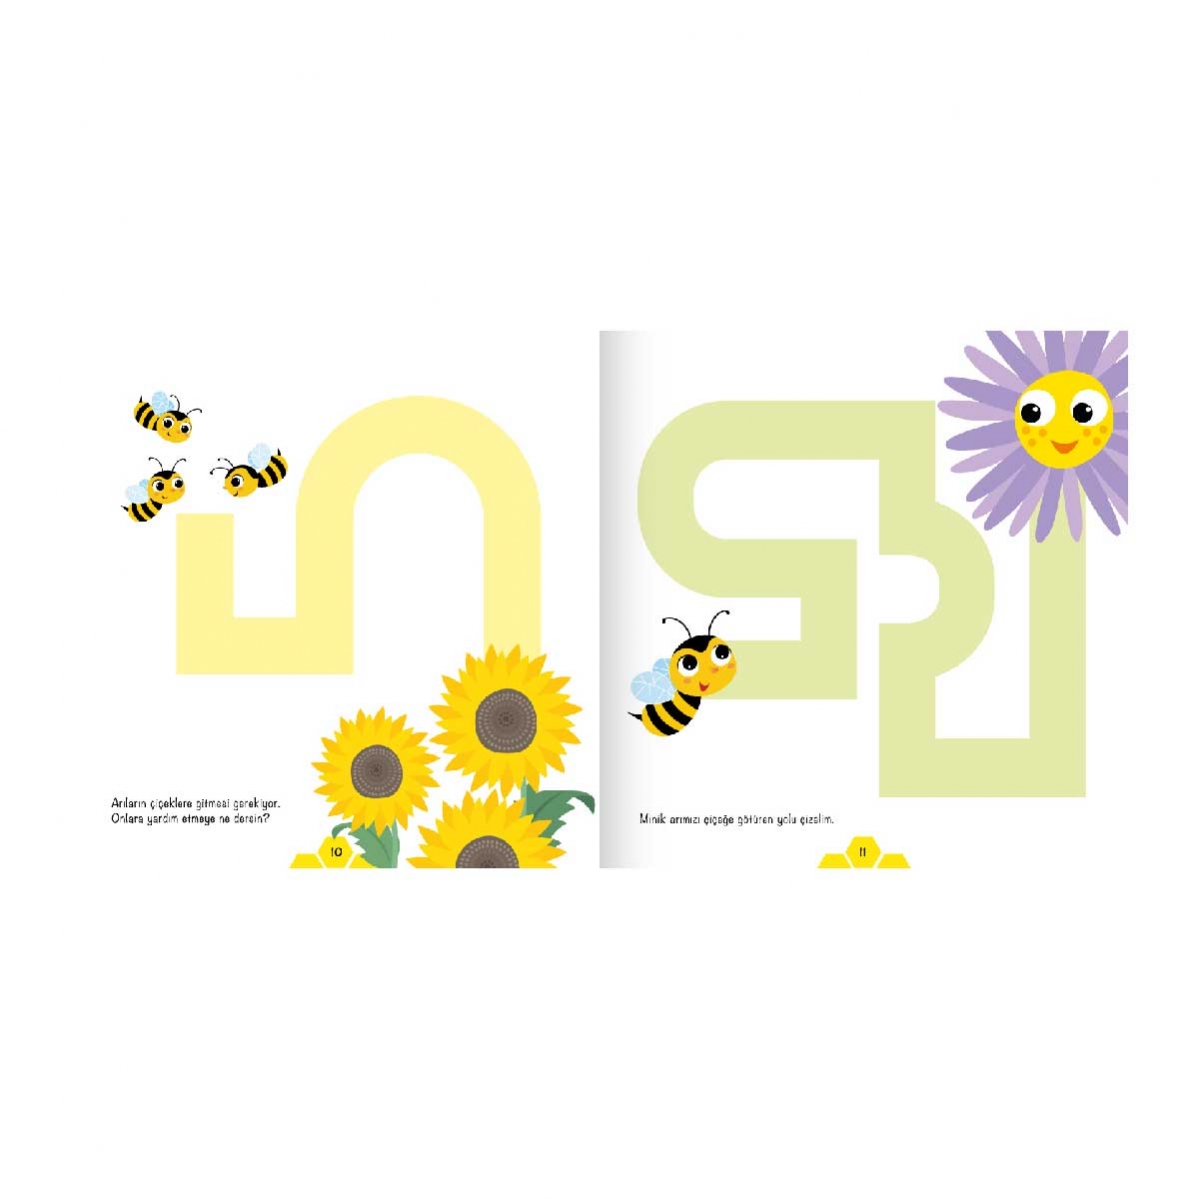 Buzz buzz buzz, My Little Bee Drawing Book for Kids